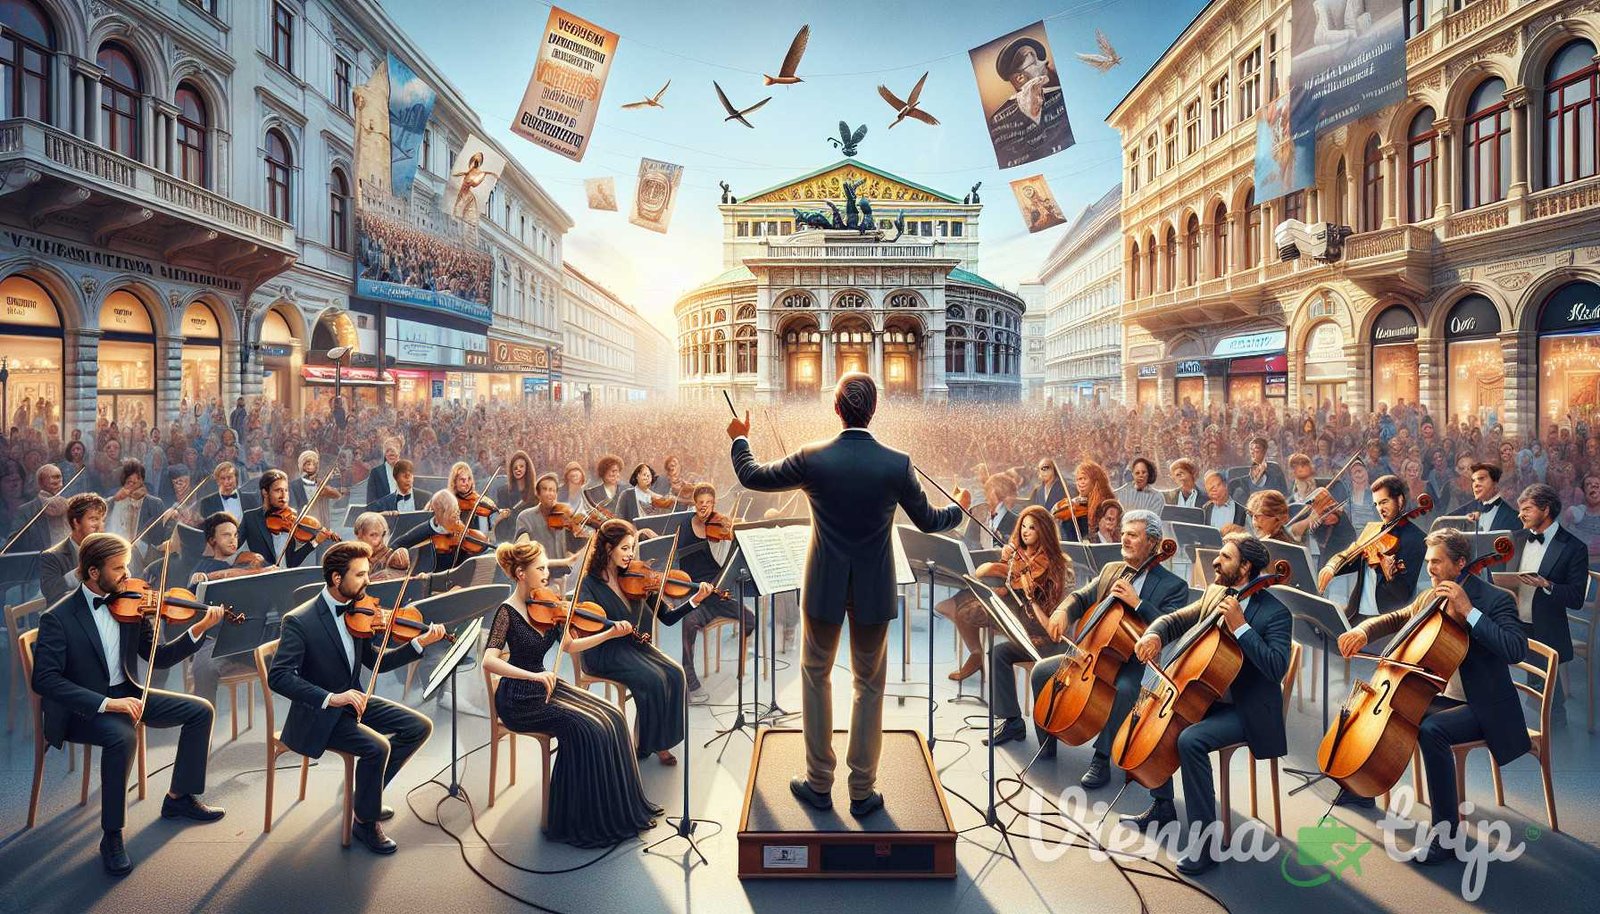 Illustration for section: Vienna's enchanting melodies extend beyond the opera houses and concert halls. The city's vibrant mu - vienna melodies